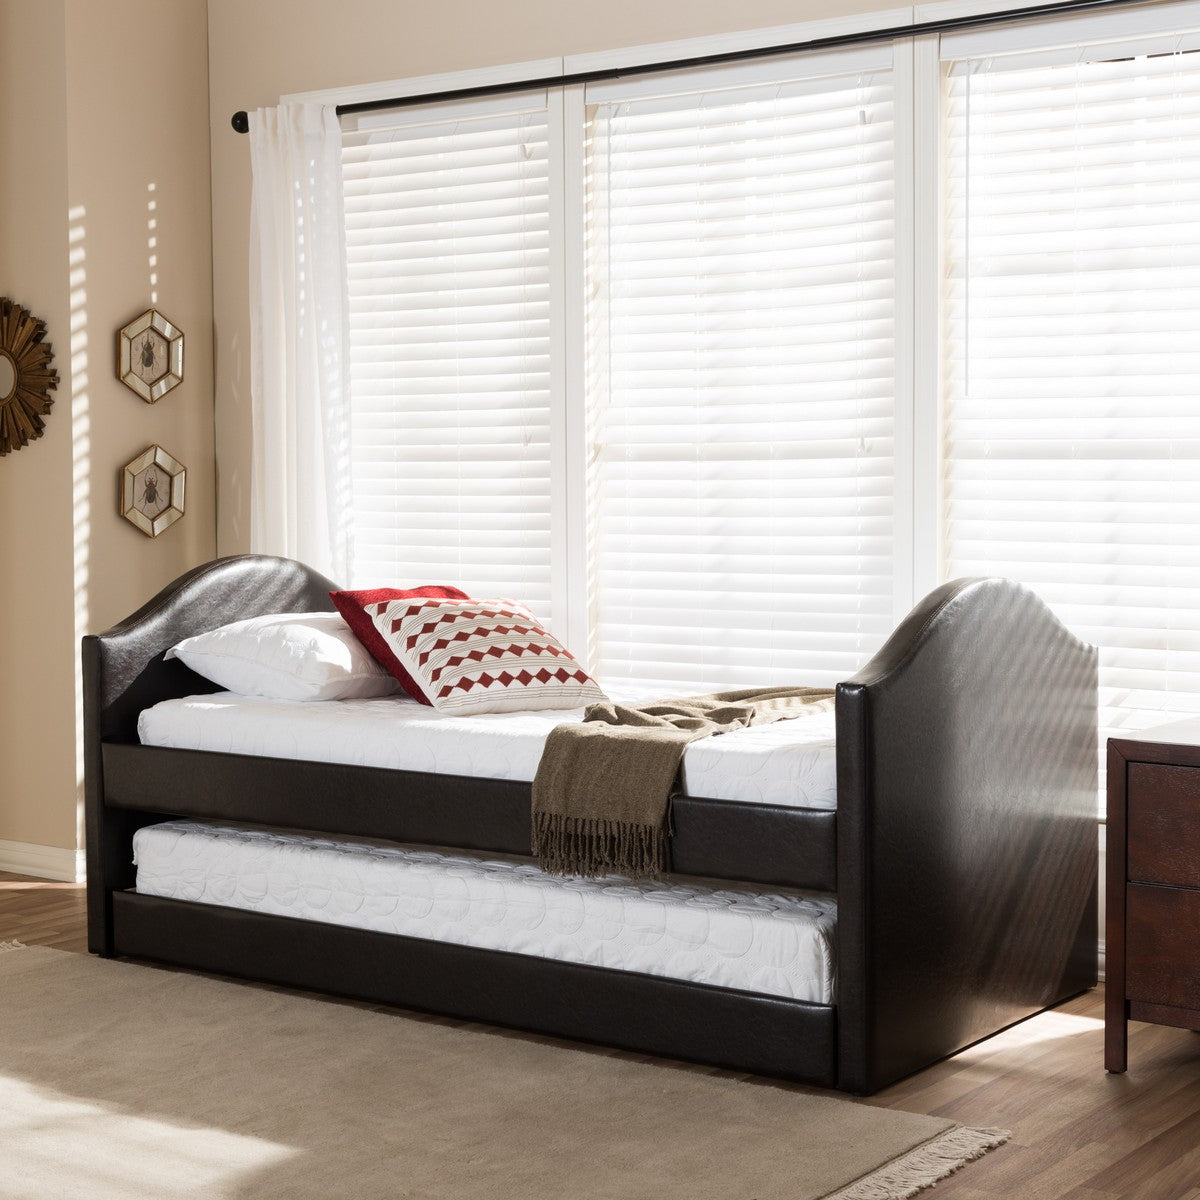 Baxton Studio Alessia Dark Brown Faux Leather Upholstered Daybed with Guest Trundle Bed